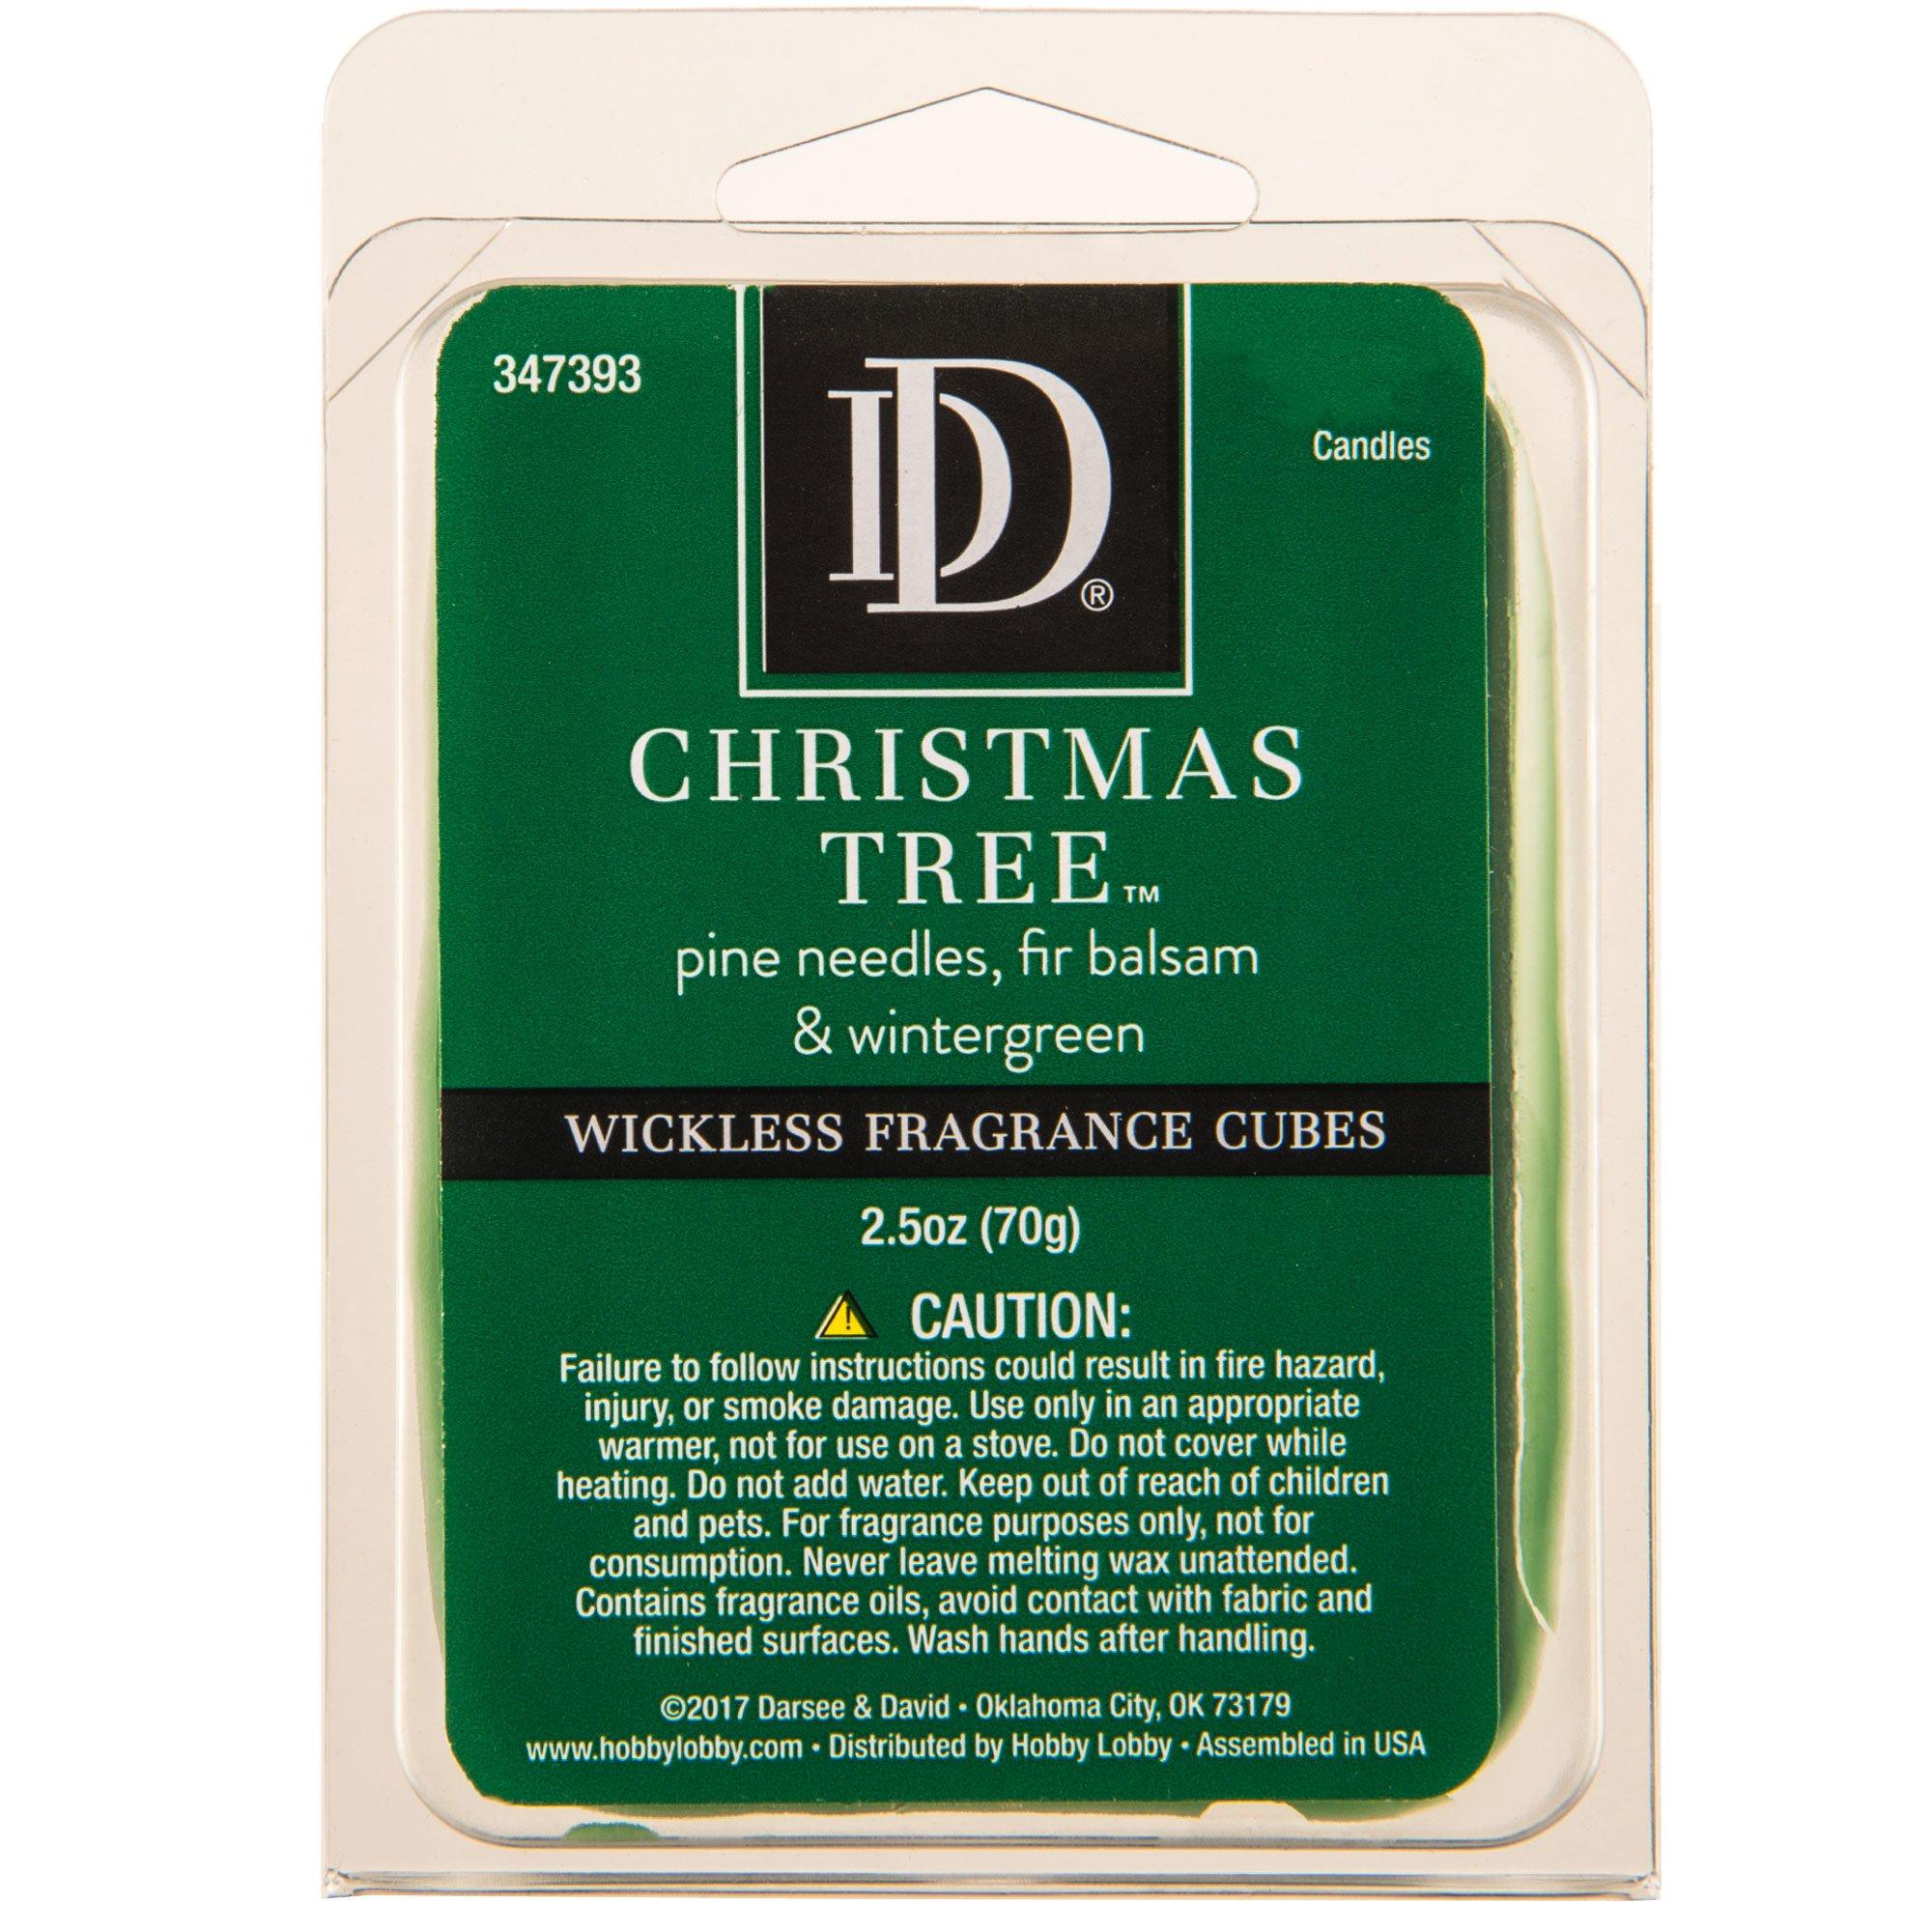 Christmas Tree Scent Wax Melts - That Kids' Craft Site